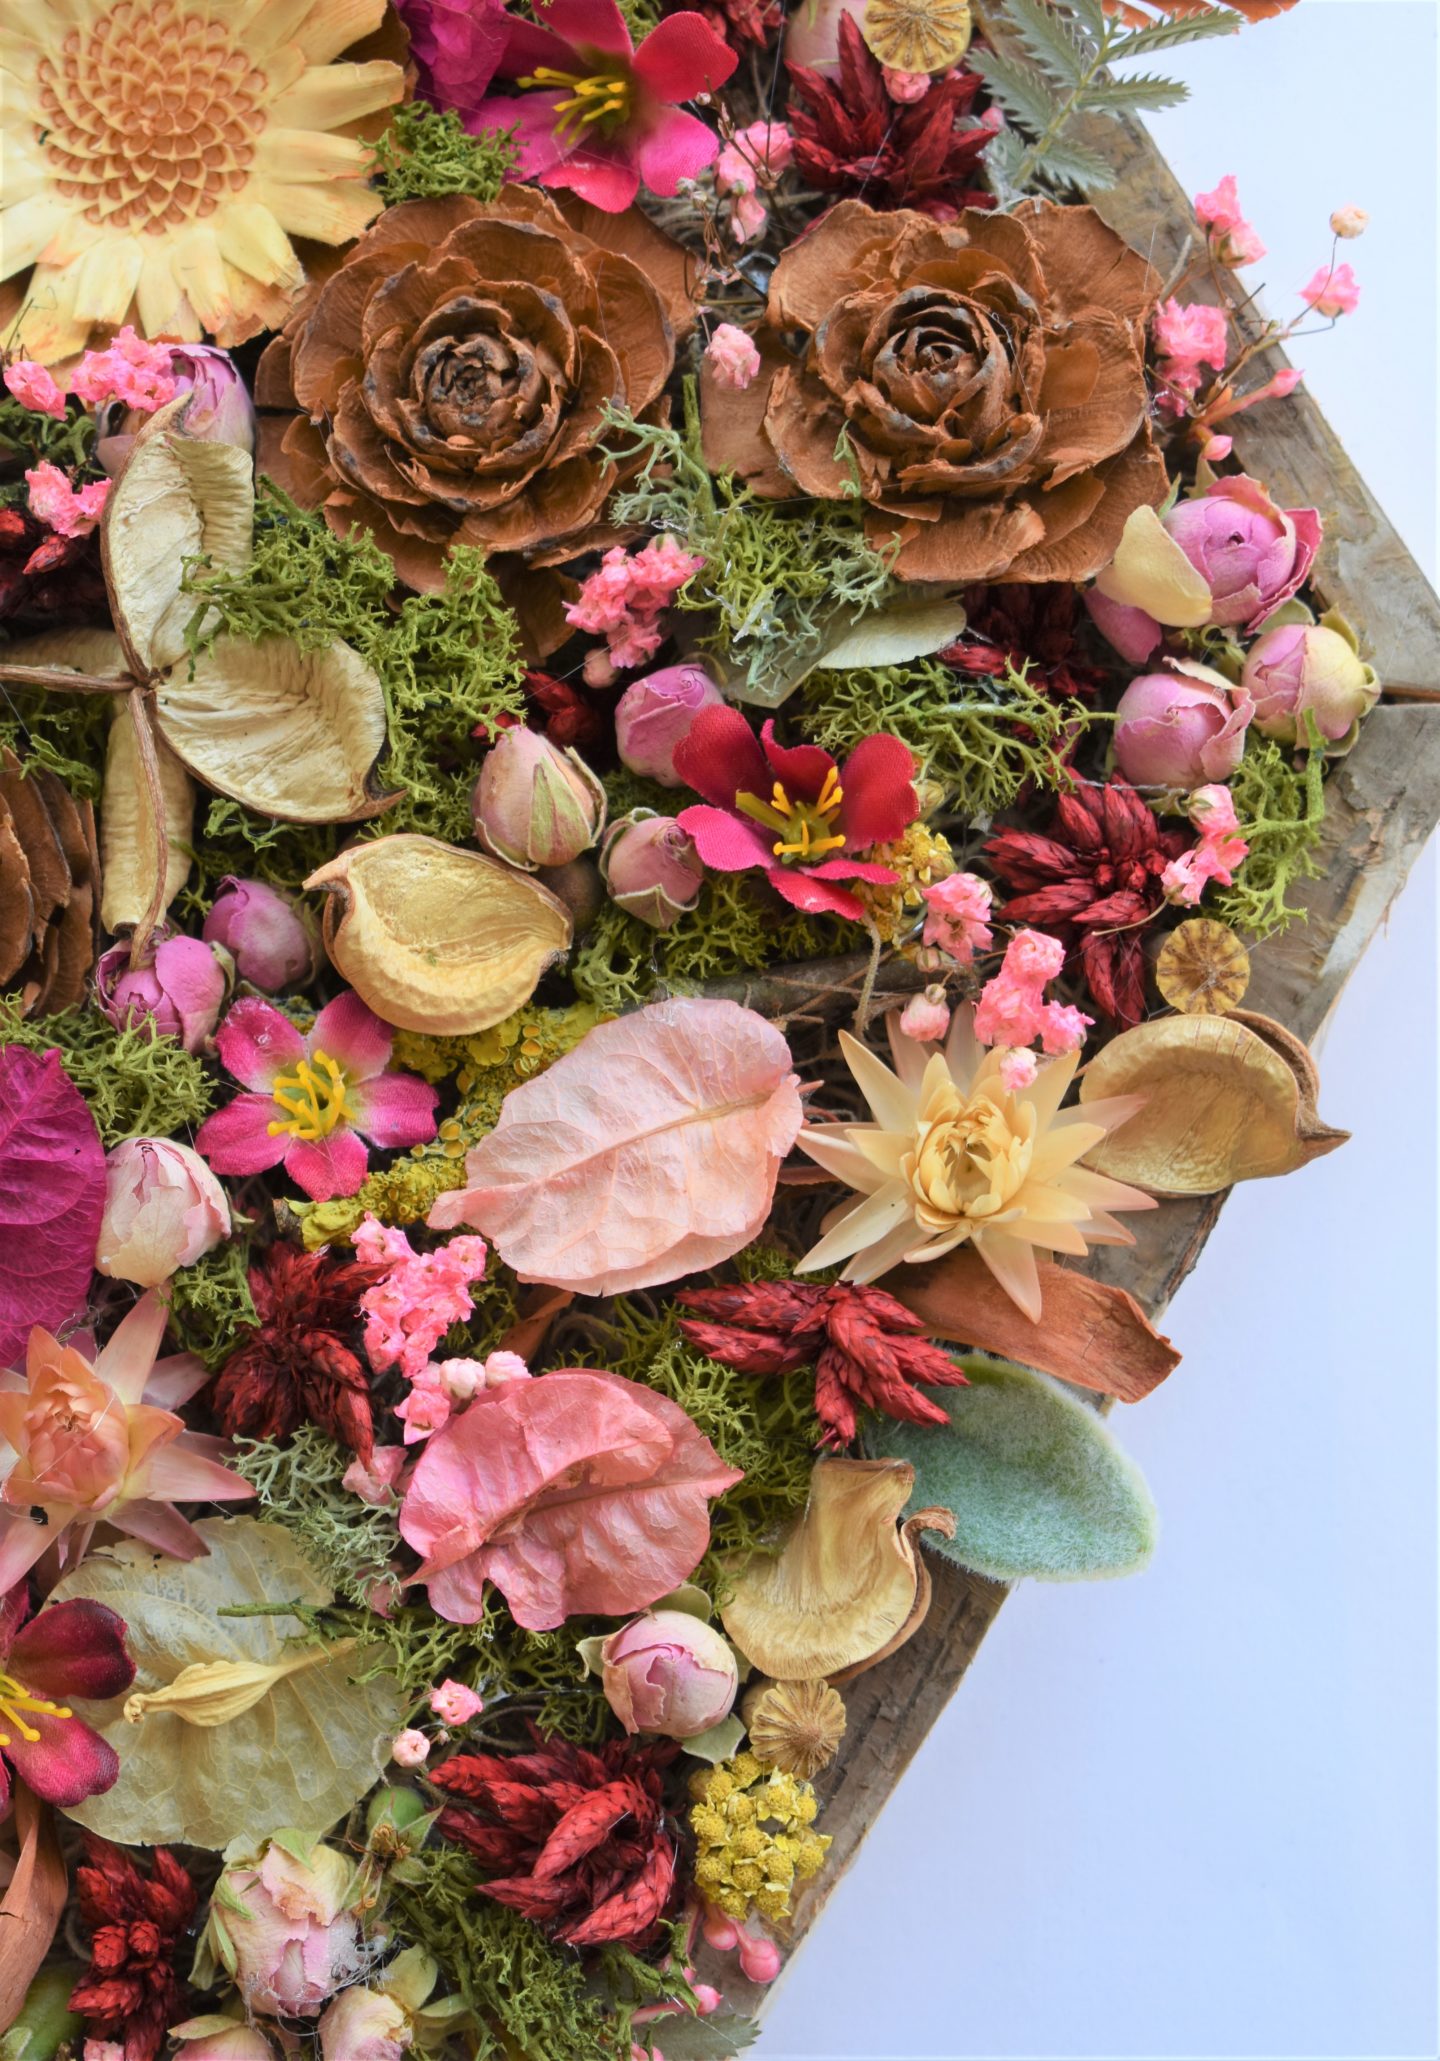 DIY Tutorial – How To Dry Wedding Flowers To Keep Them Forever